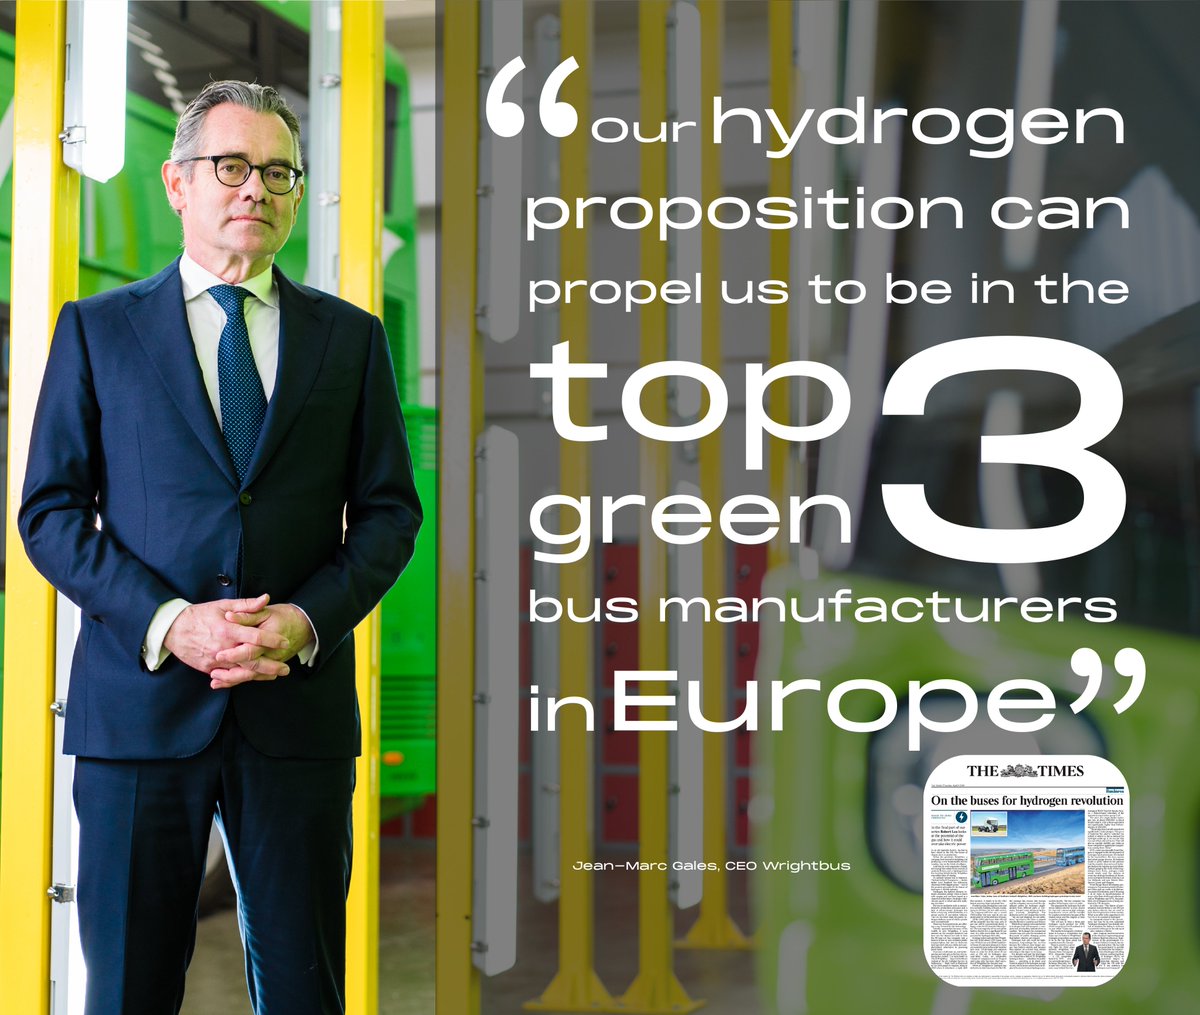 “Our hydrogen proposition can propel us to be in the top three green bus manufacturers in Europe” Jean-Marc Gales, @Wright_bus CEO ➡️ wrightbus.com/en-gb/on-the-b… #Wrightbus #DrivingAGreenerFuture #Hydrogen #HydrogenBus #HydrogenInfrastructure #HydrogenEconomy #Decarbonisation